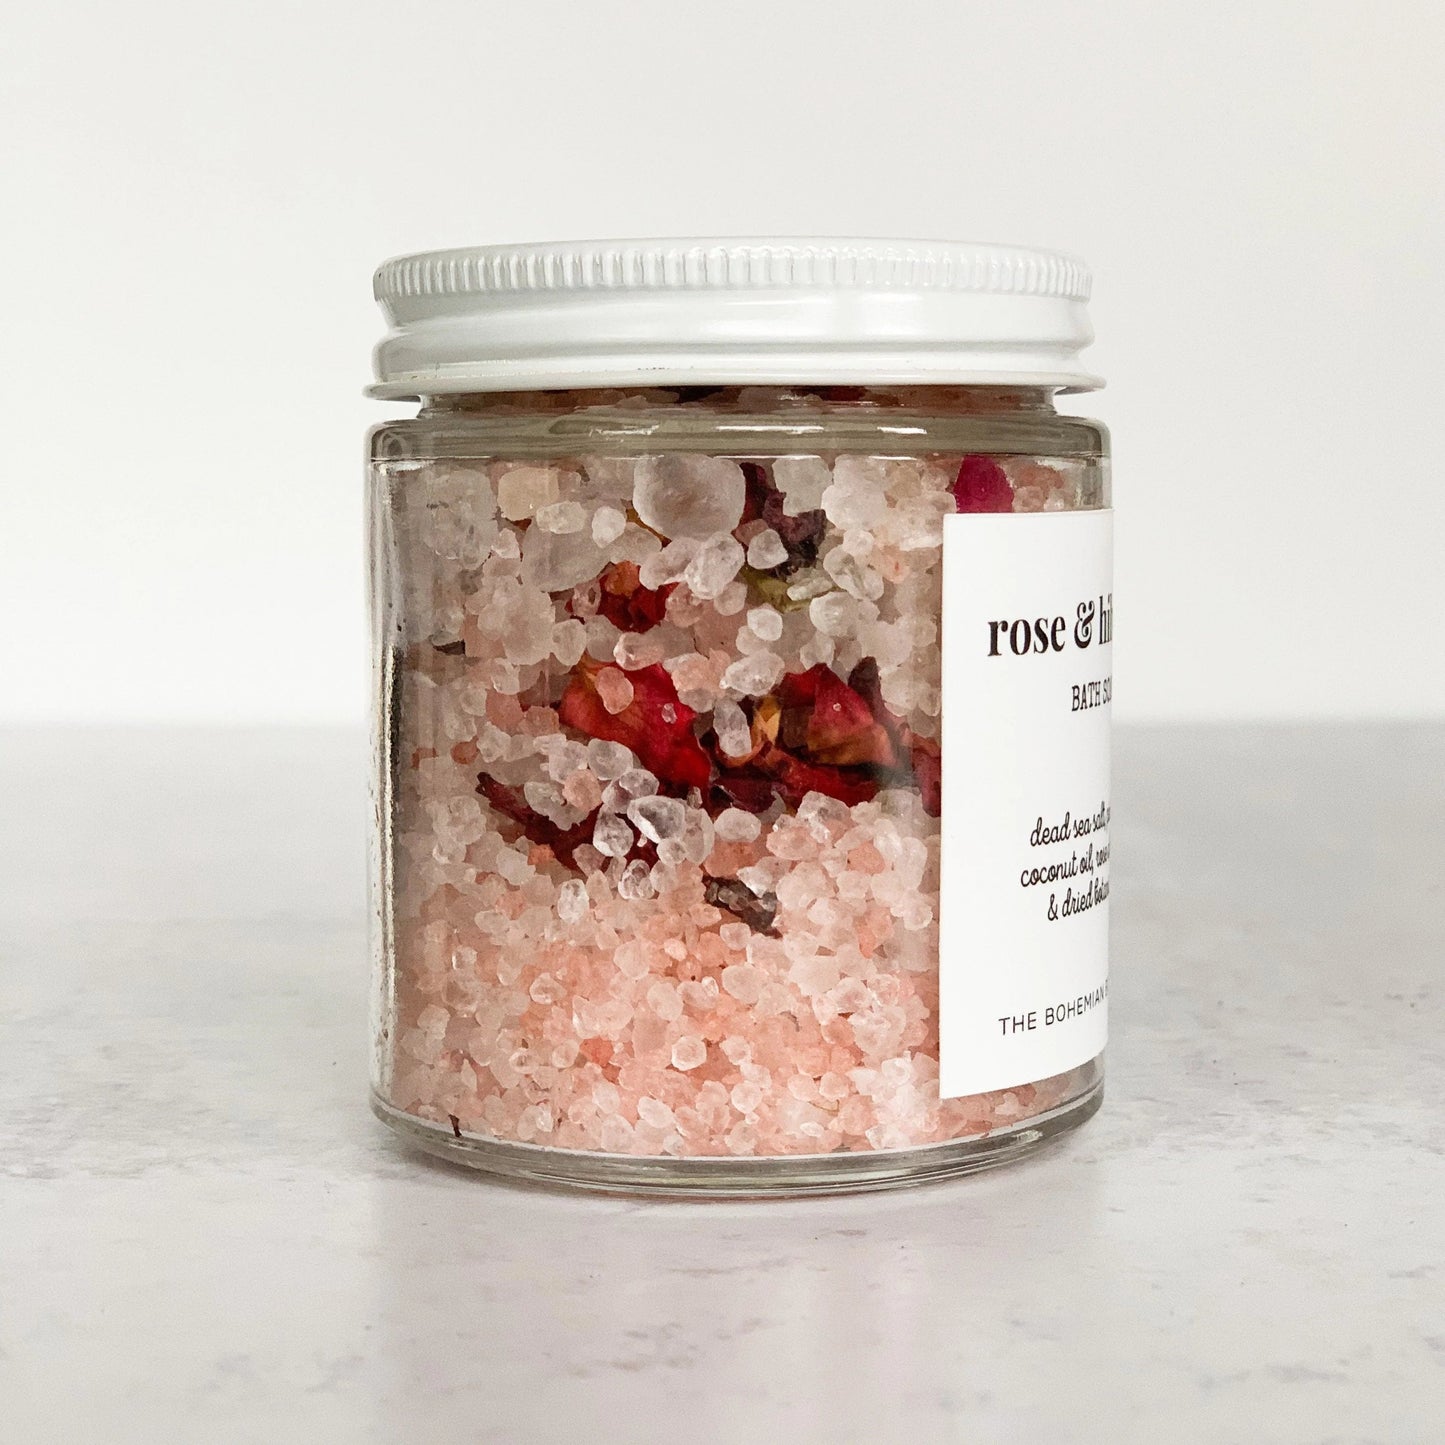 Rose and Hibiscus Bath Soak in a clear glass jar with white lid